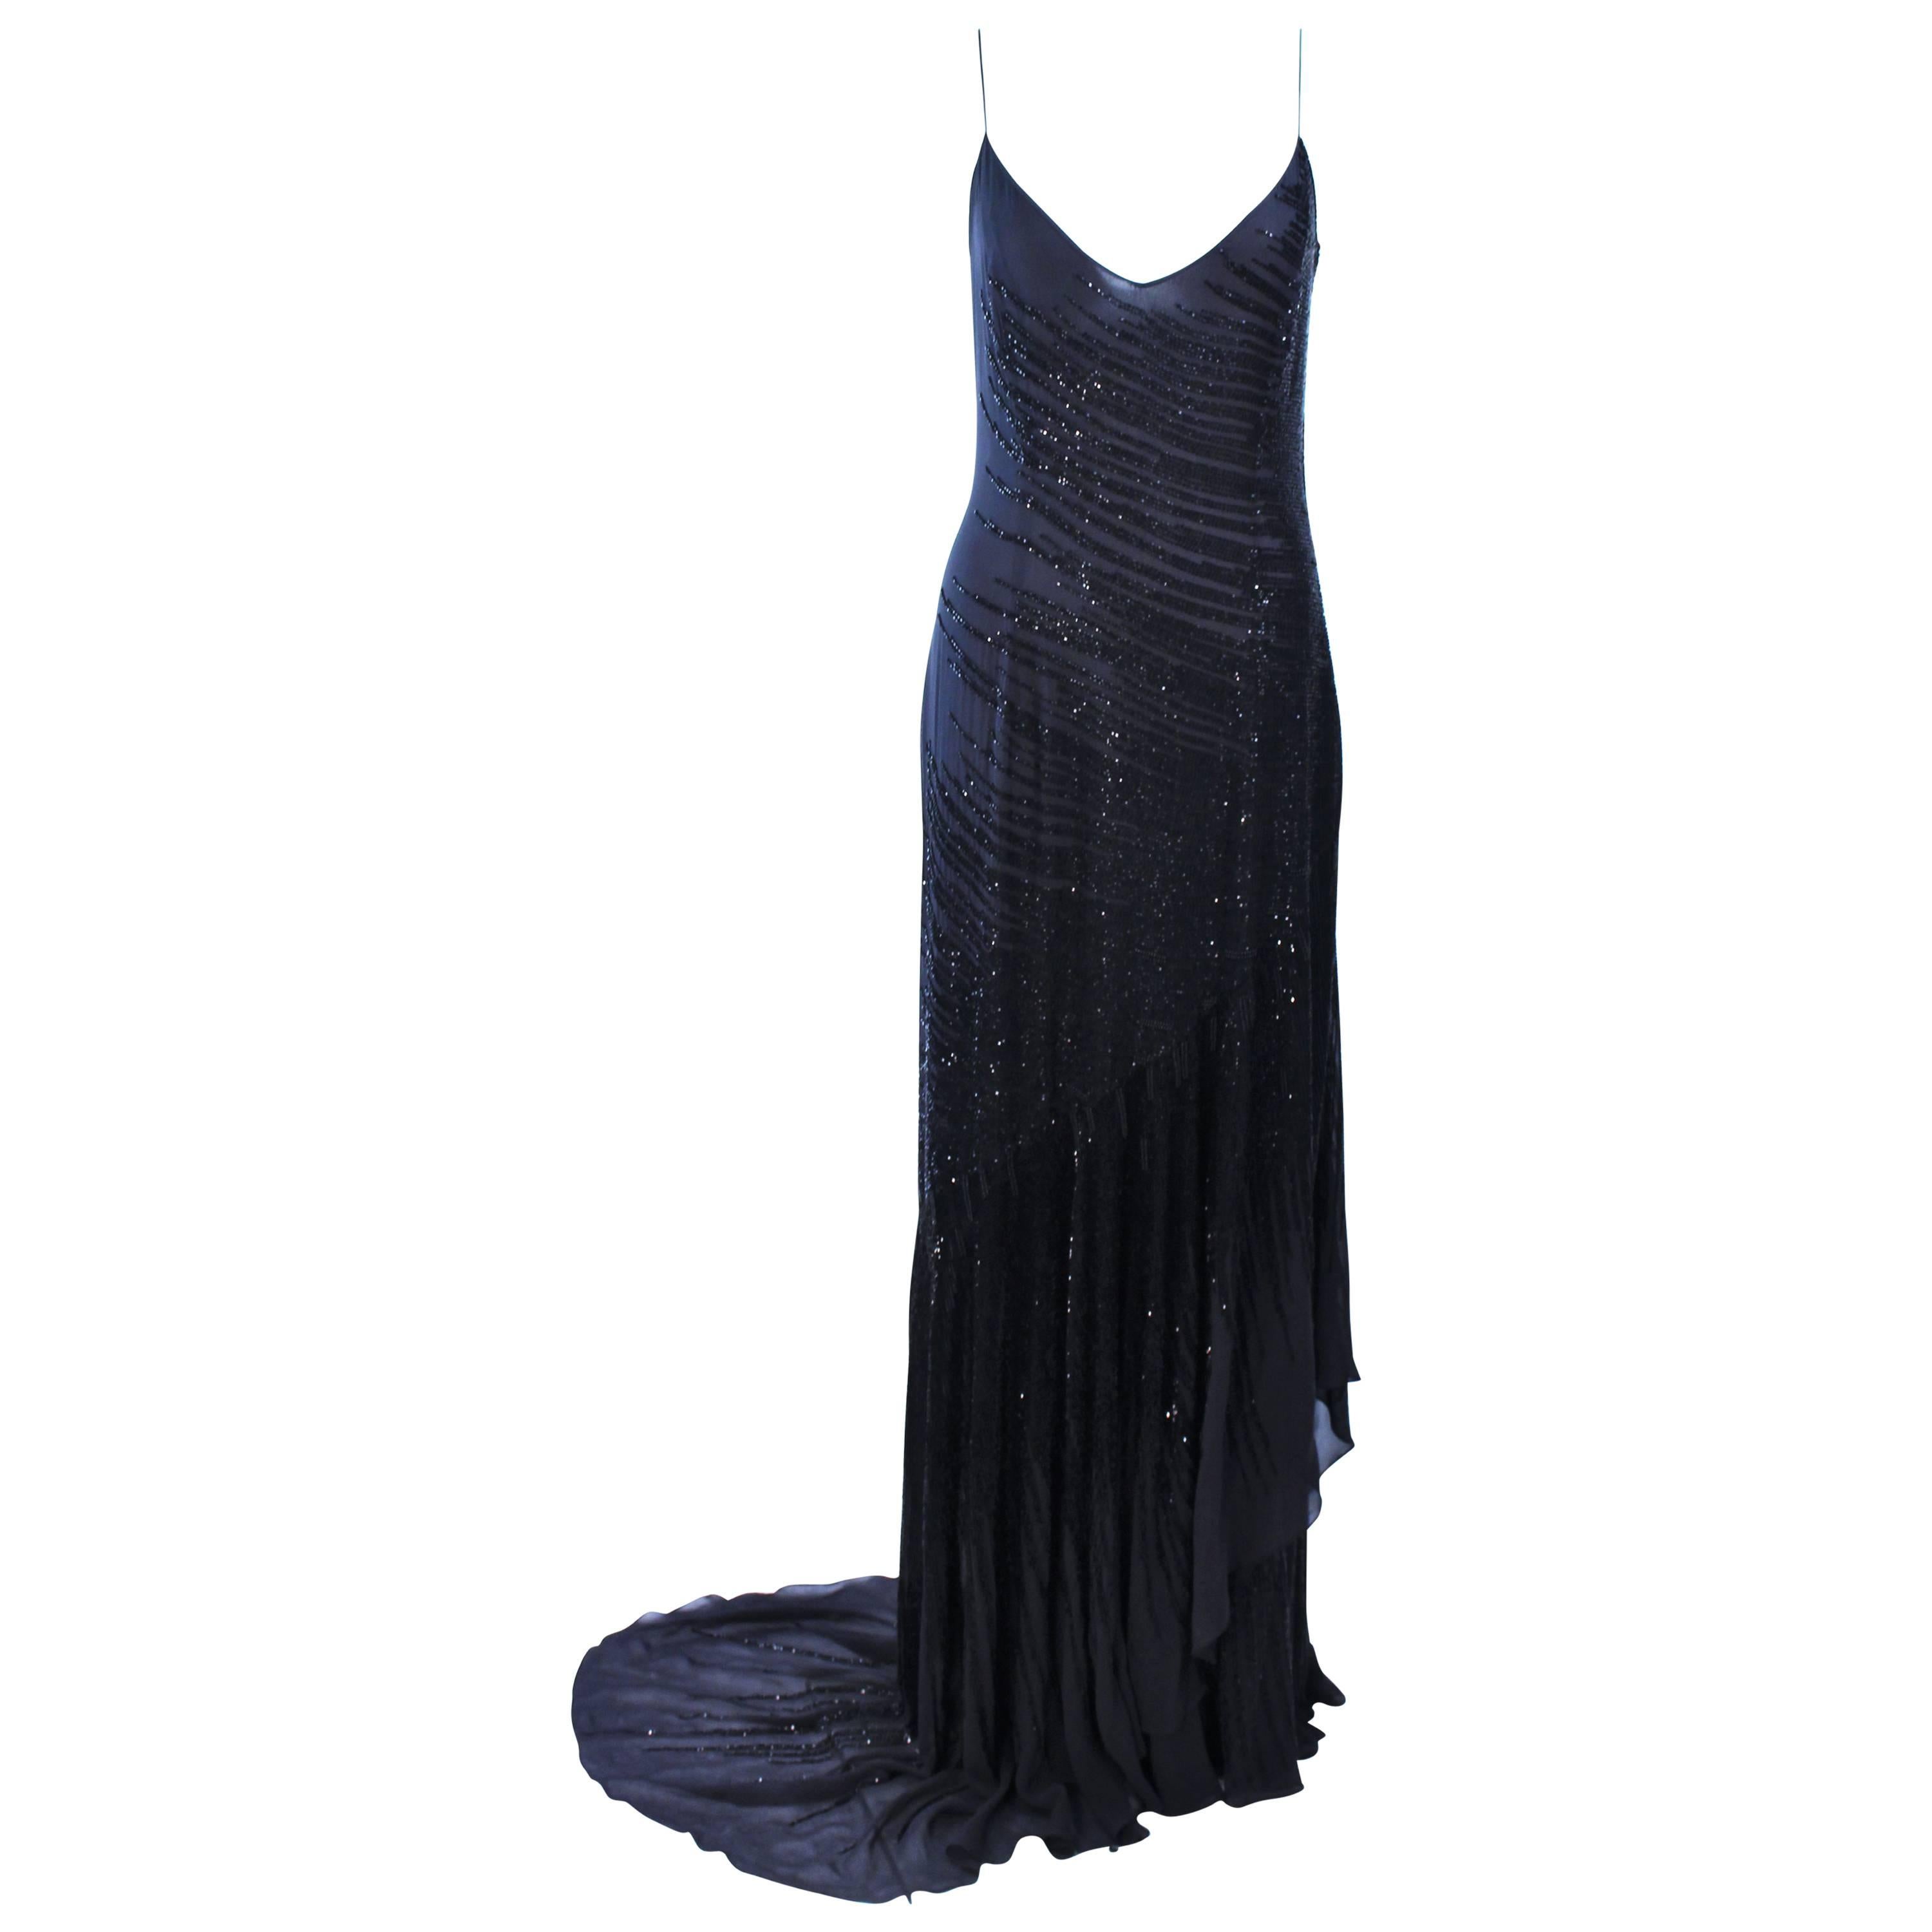 AMANDA WAKELY Black Beaded Silk Chiffon Gown Size 8 For Sale